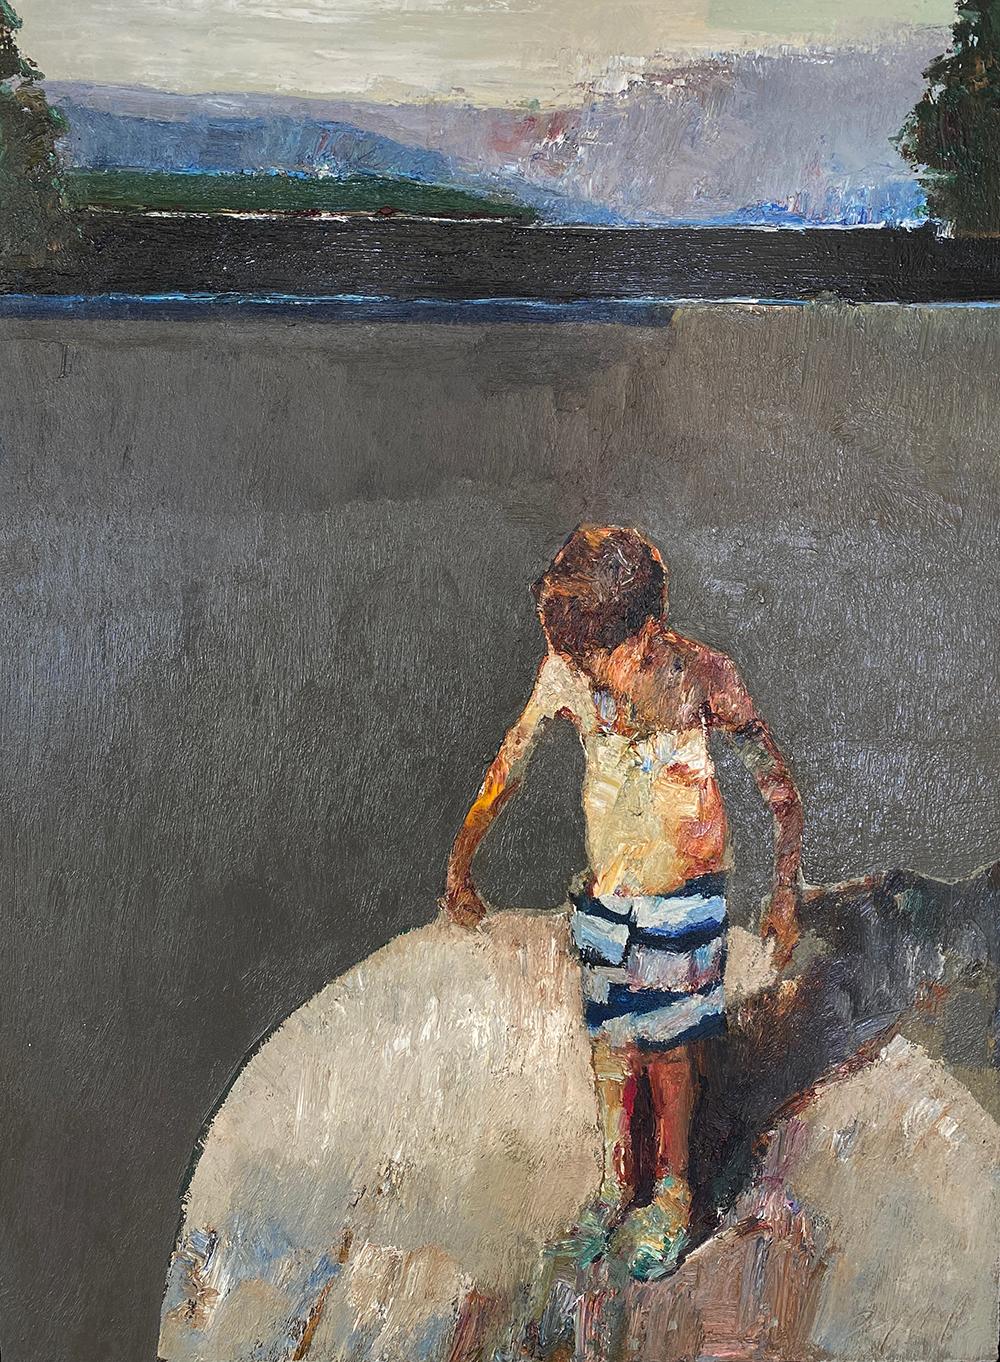 Boy on Rock - Painting by Danny McCaw